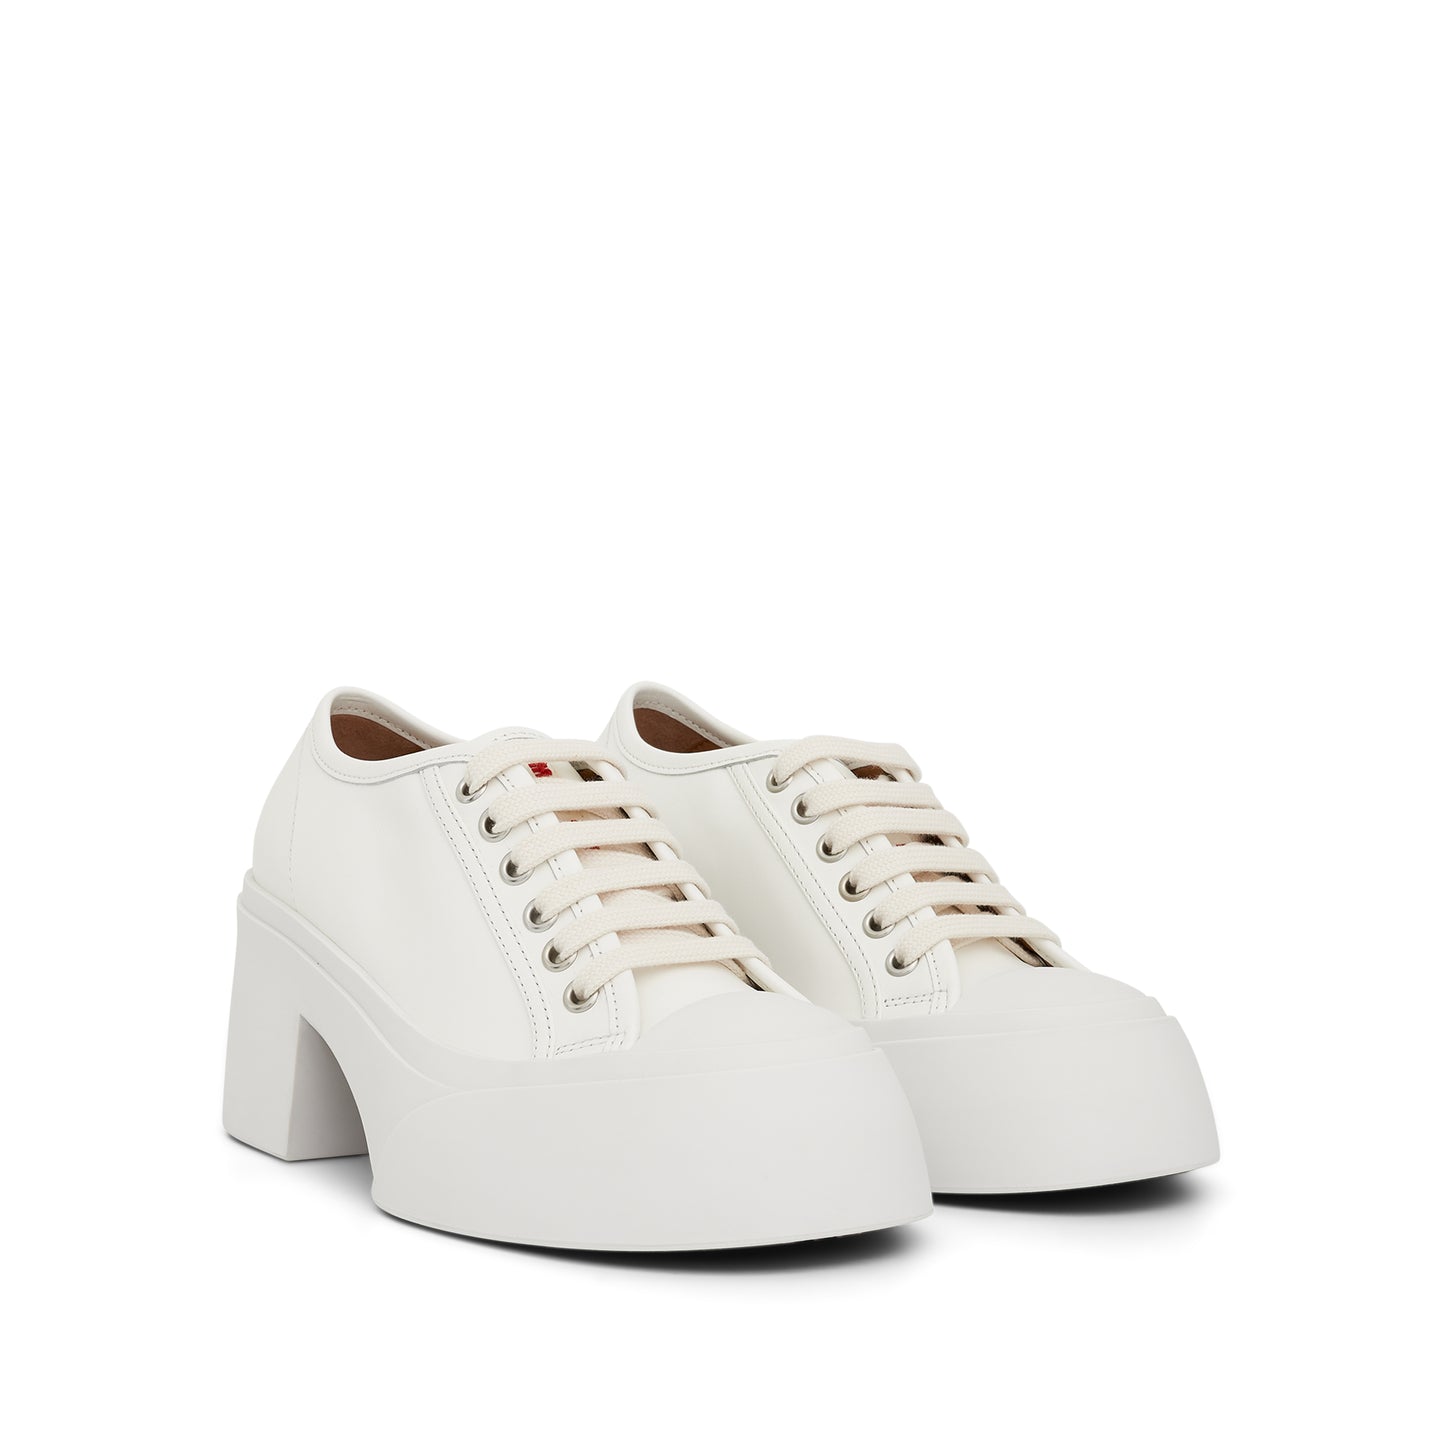 Pablo Lace-Up Pumps in White